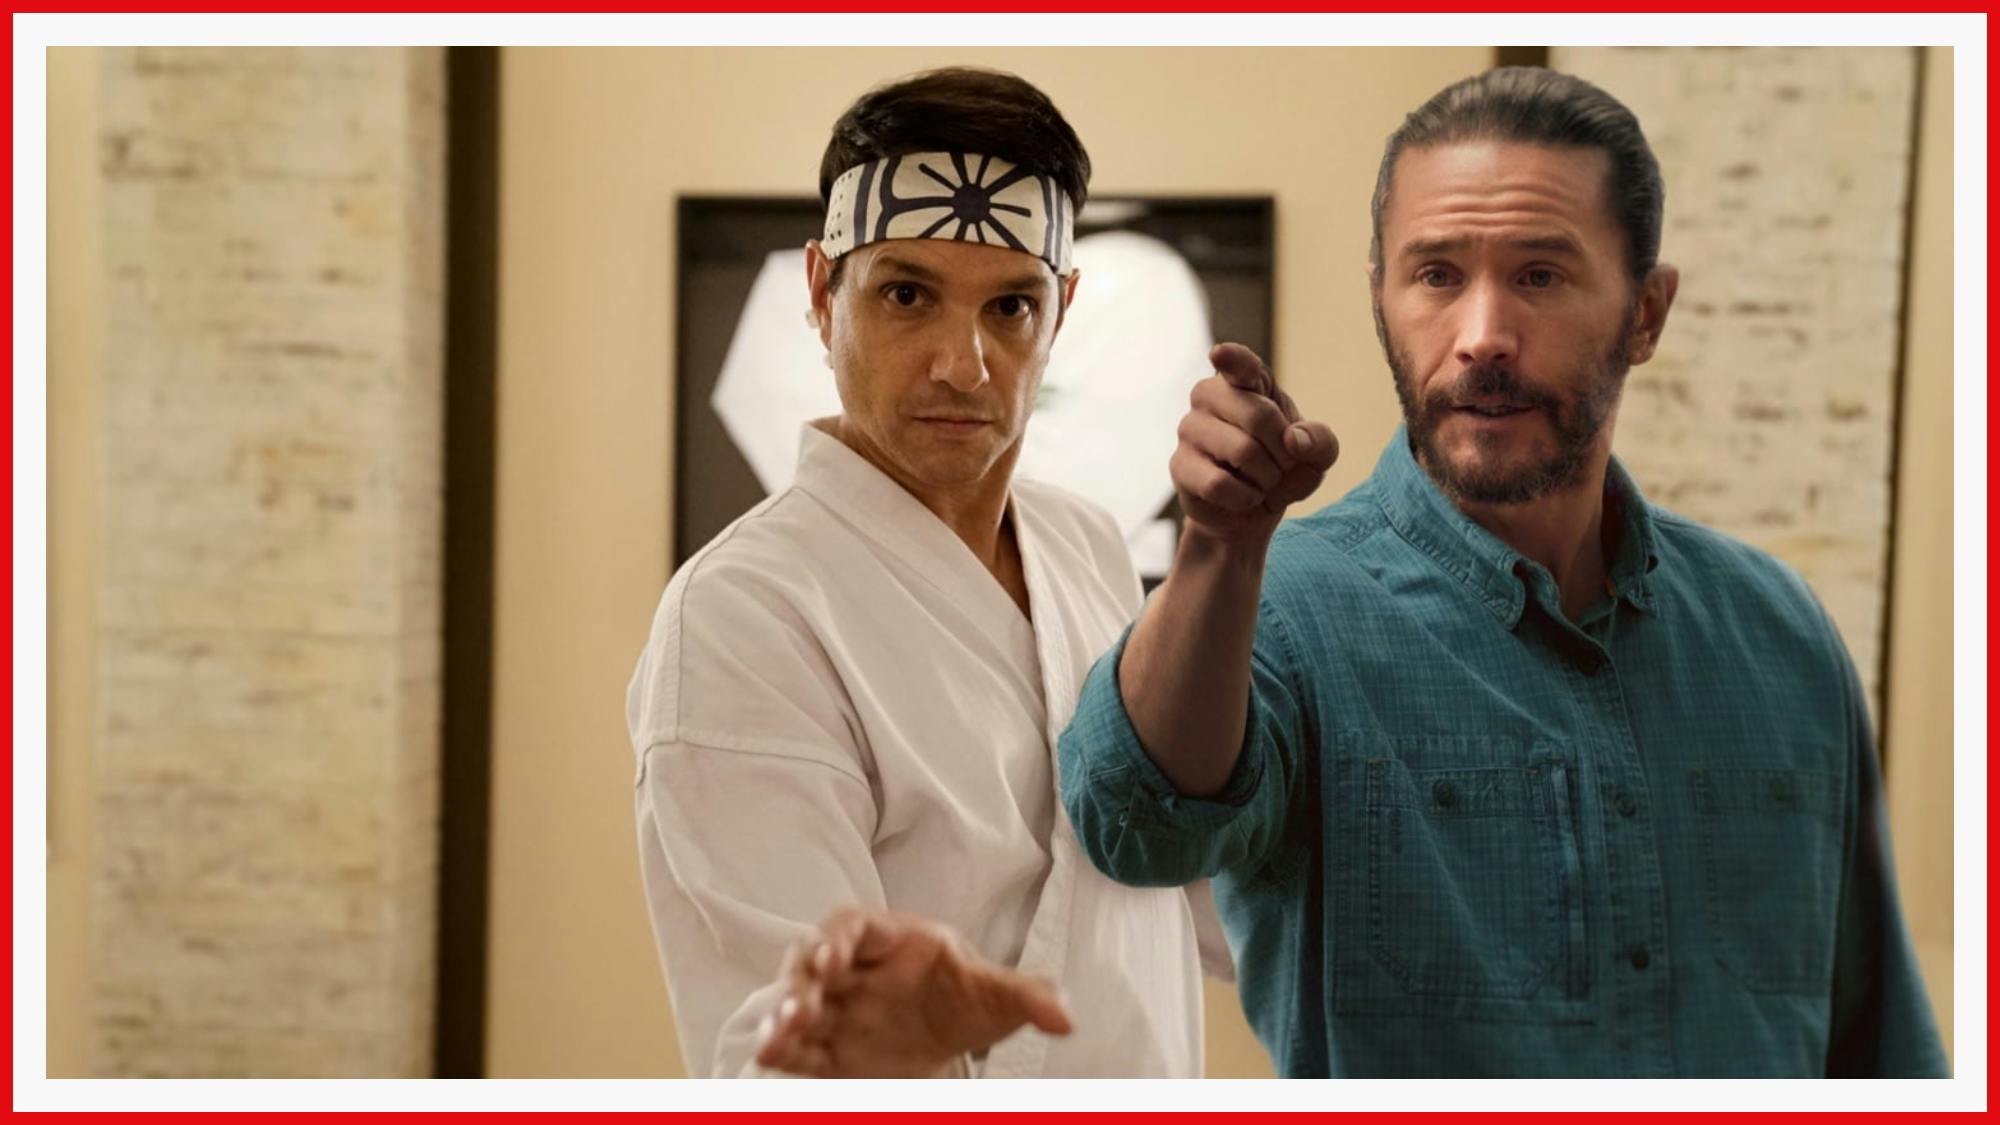 Tom Pelphrey as Ben Davis from Ozark makes an imagined cameo in one of his favorite series this year, Cobra Kai.